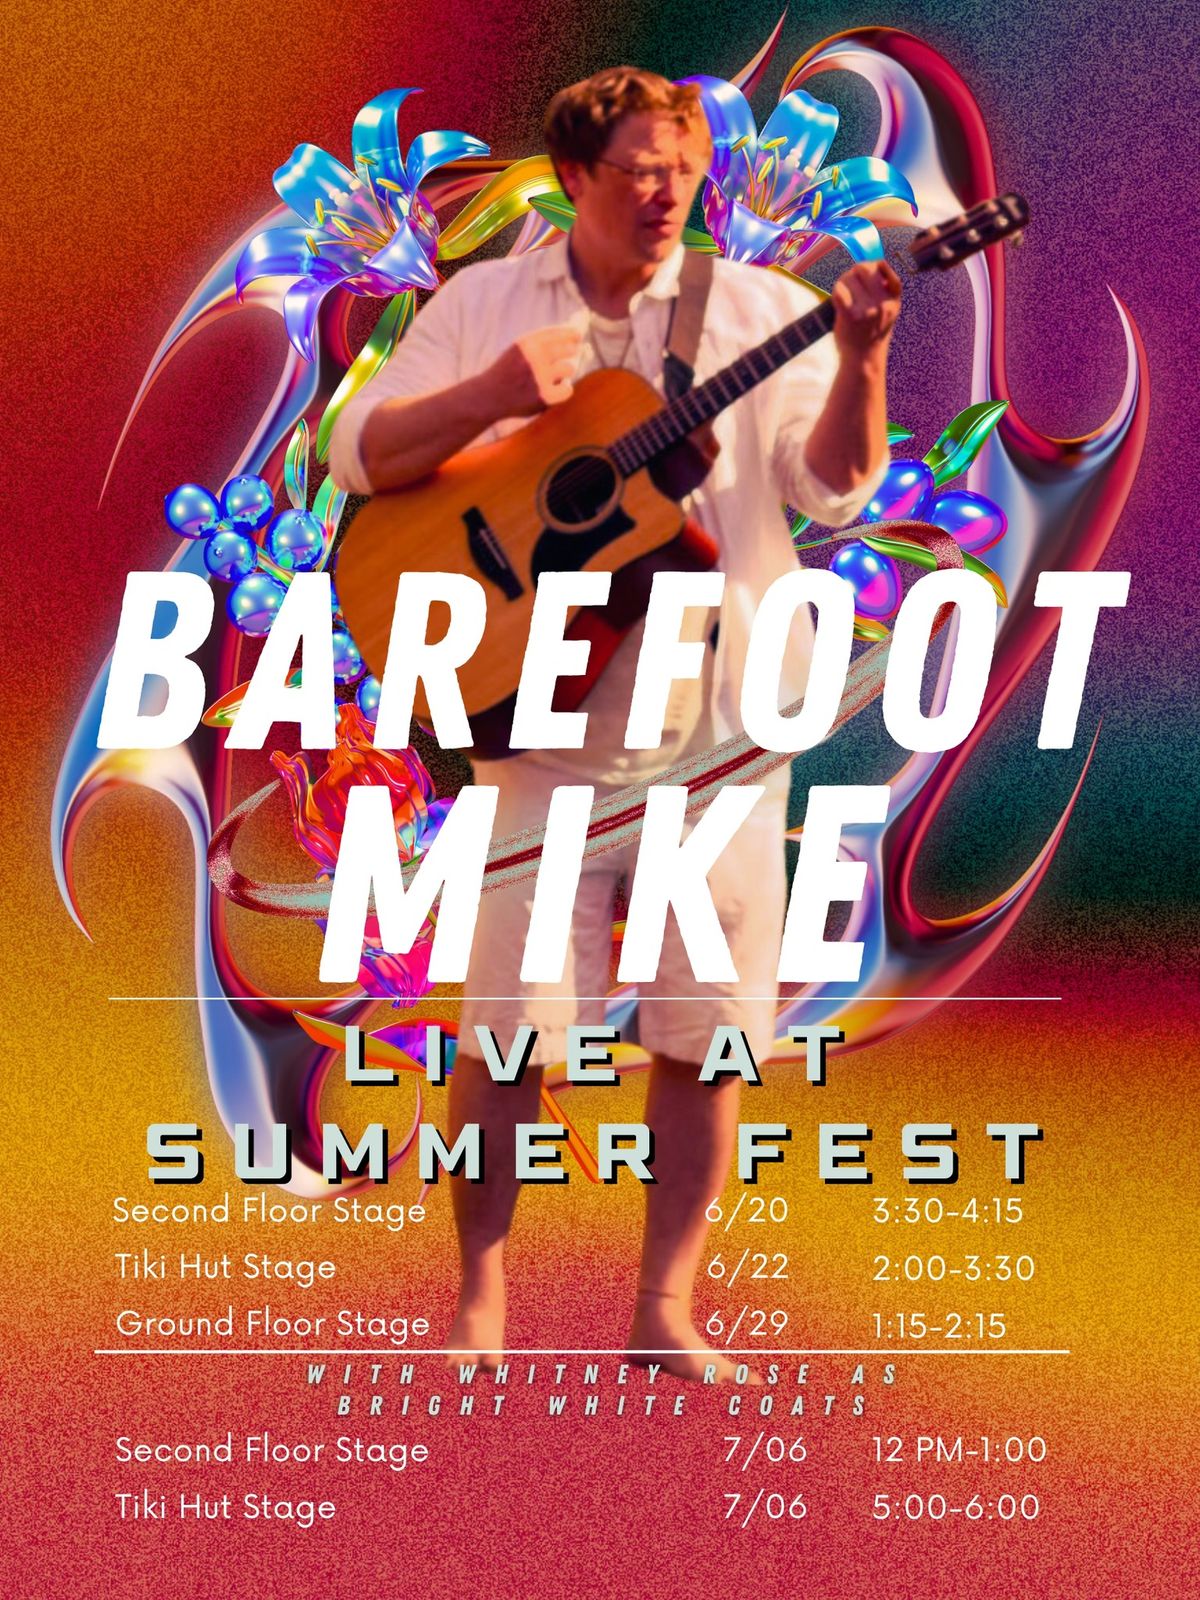 Barefoot Mike AND Bright White Coats at SUMMERFEST! (Ground Floor, Second Floor and Tiki Hut Stages)